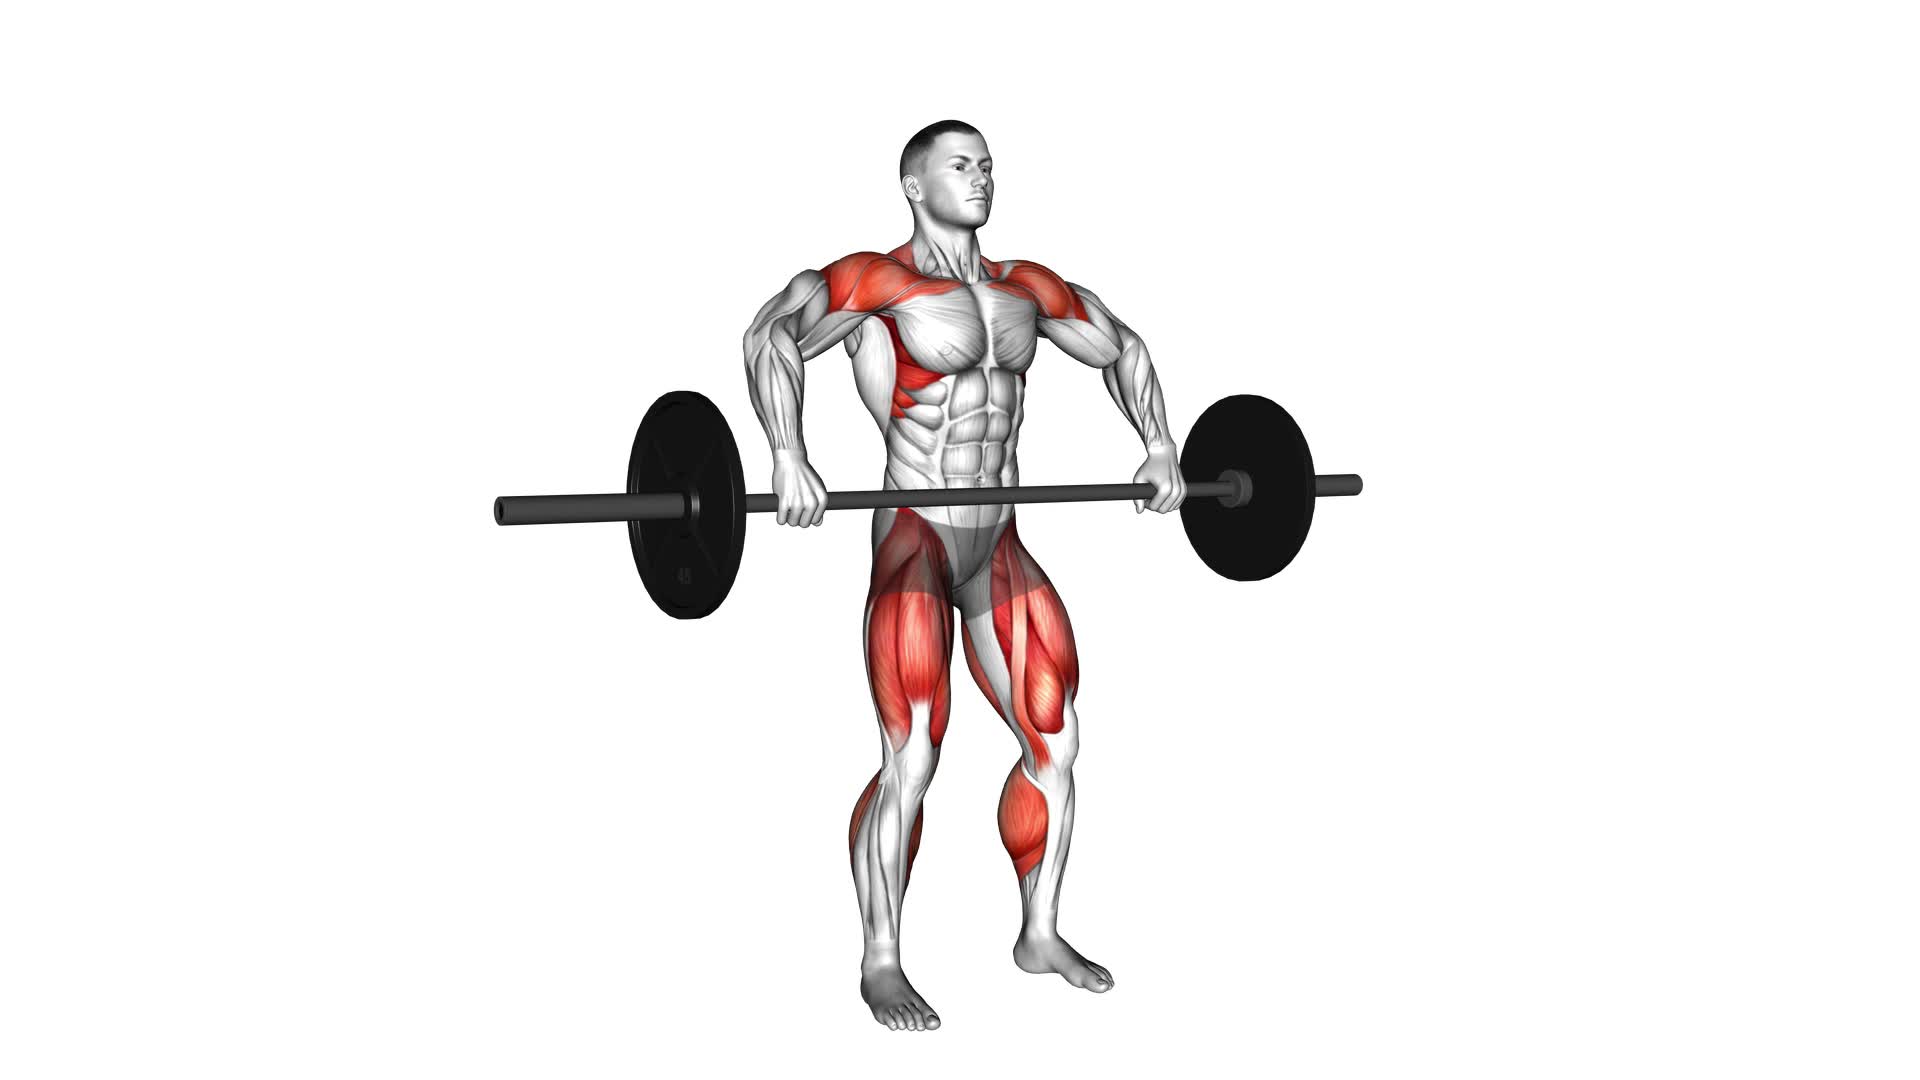 Barbell Snatch Pull - Video Exercise Guide & Tips